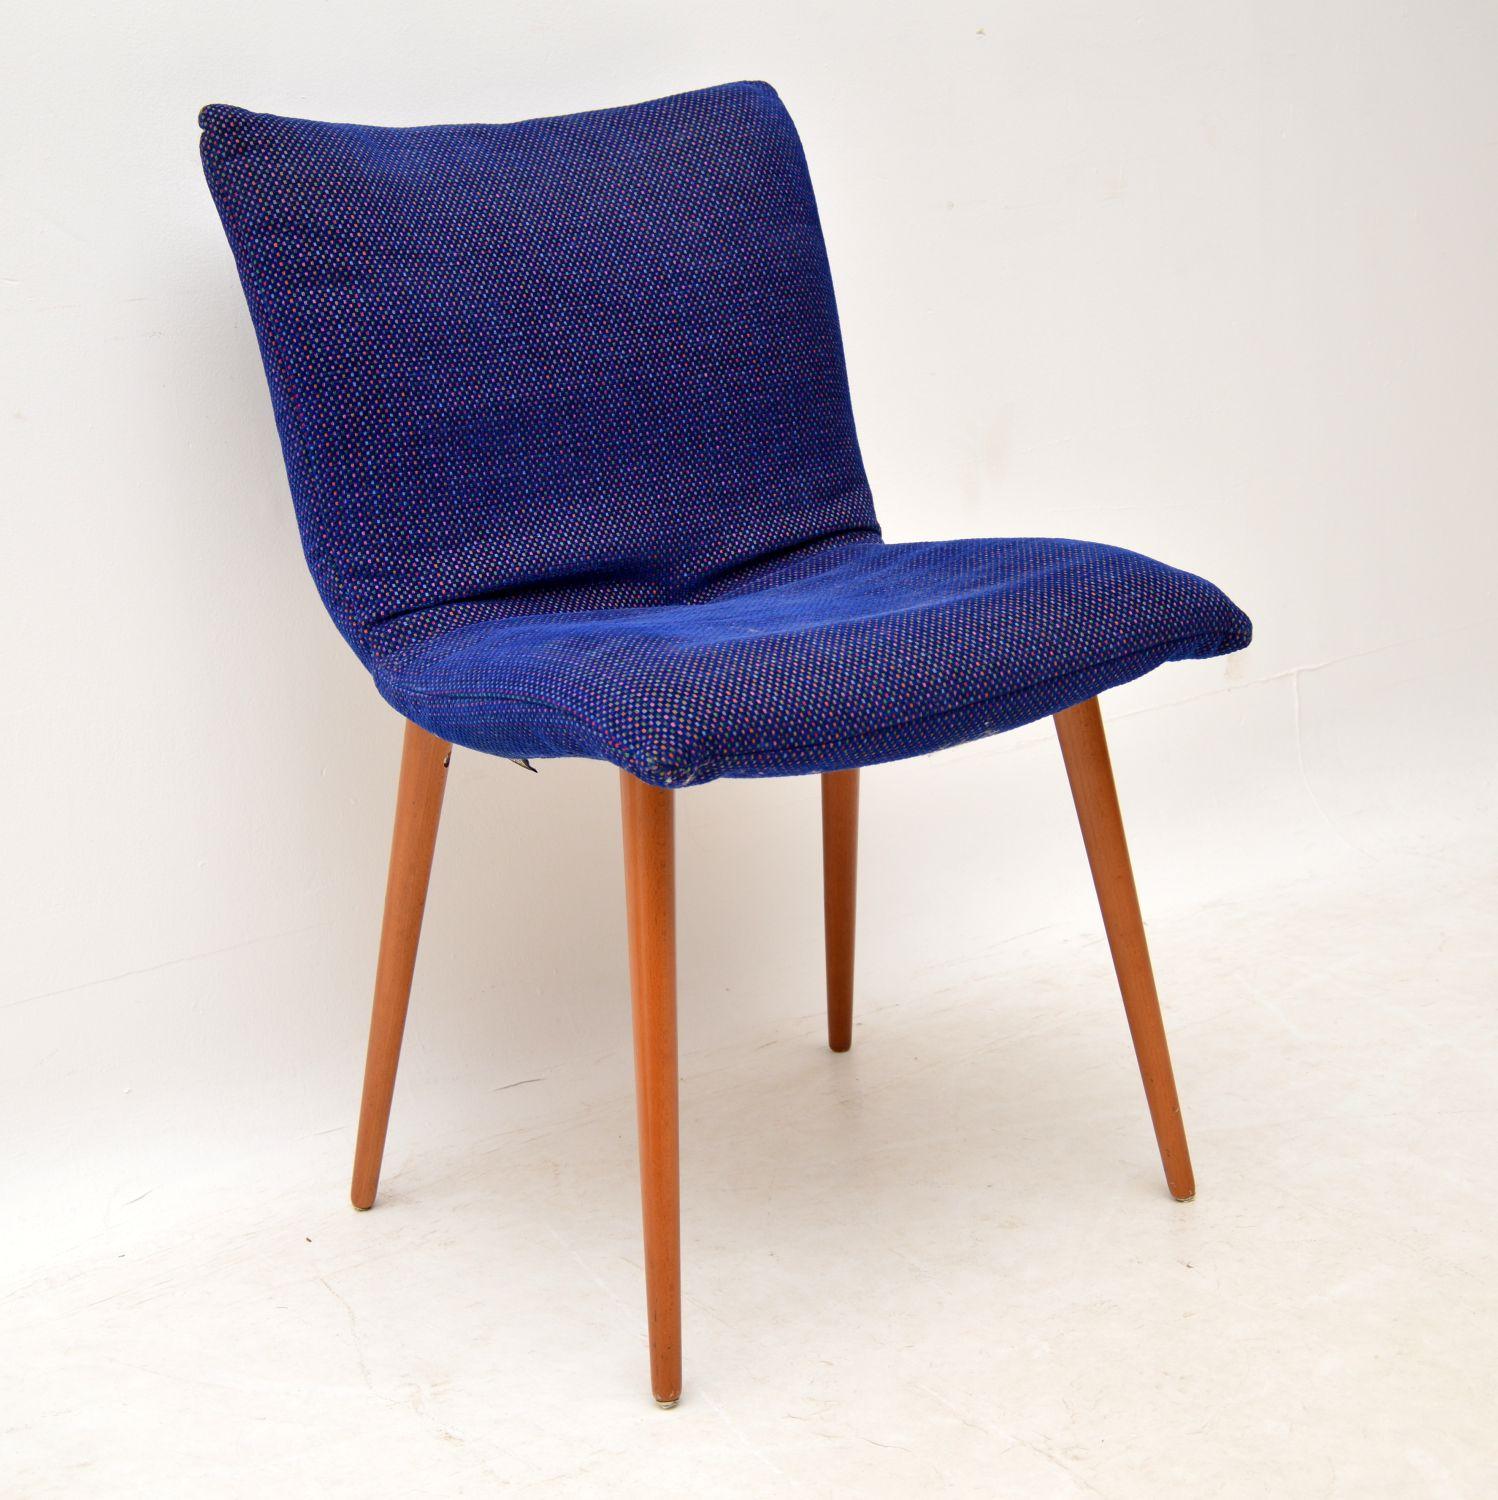 A fantastic set of designer Ligne Roset dining chairs dating from the late 20th century. They are very beautiful and extremely comfortable, I had an identical set in my home so can personally vouch for their comfort! The condition is excellent, with